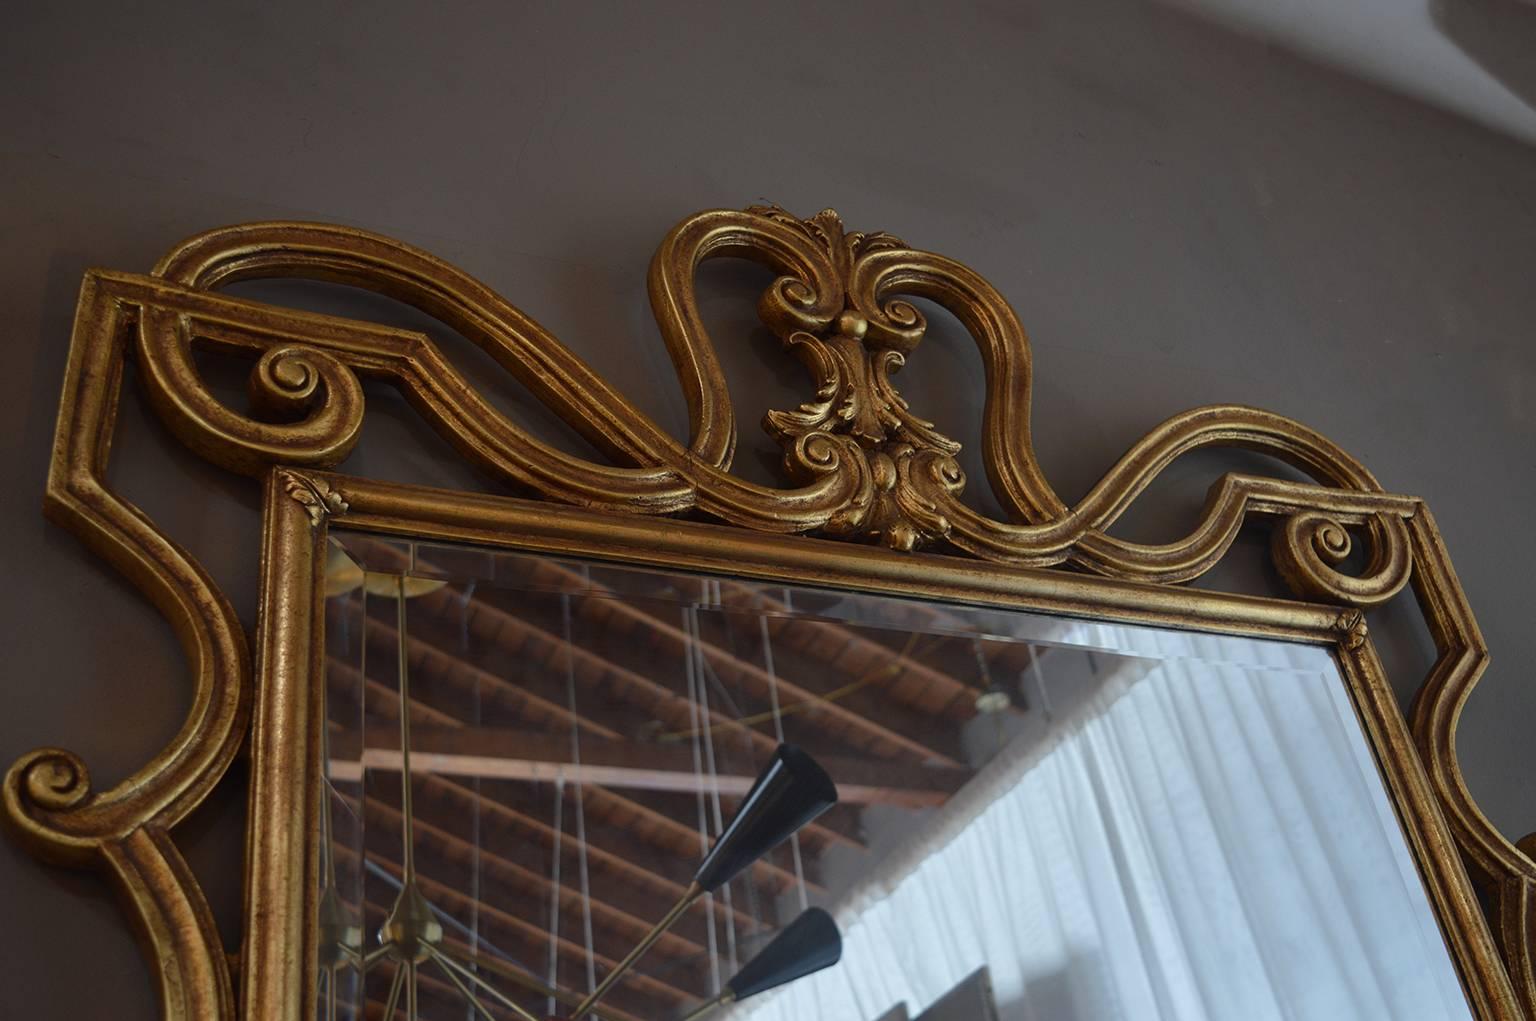 The frame of the mirror is hand-carved wood with beautiful details and gold leafed.